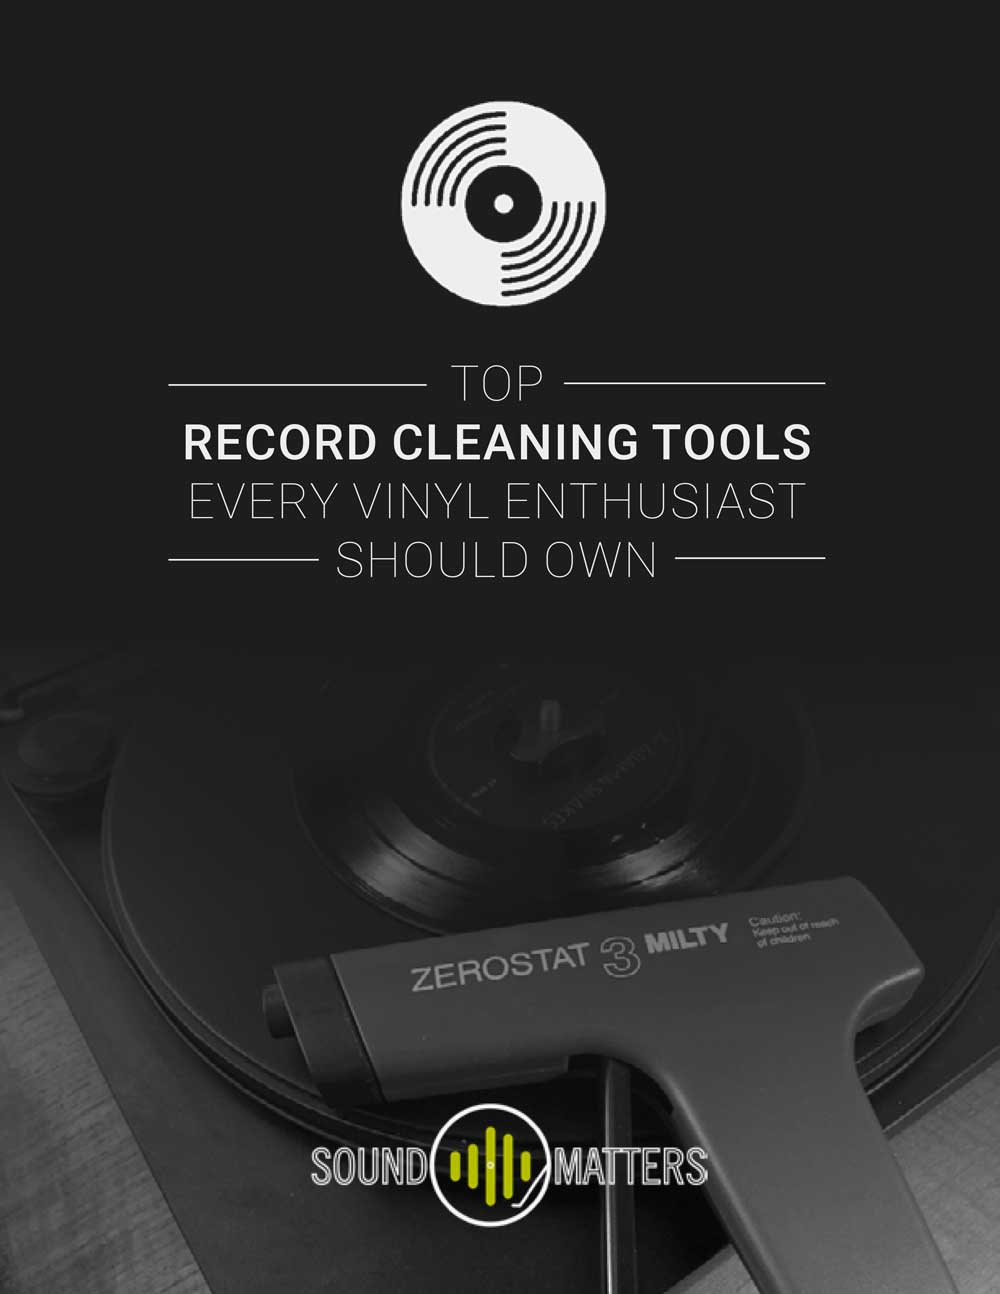 Top Vinyl Record Books For Record Collectors - Sound Matters